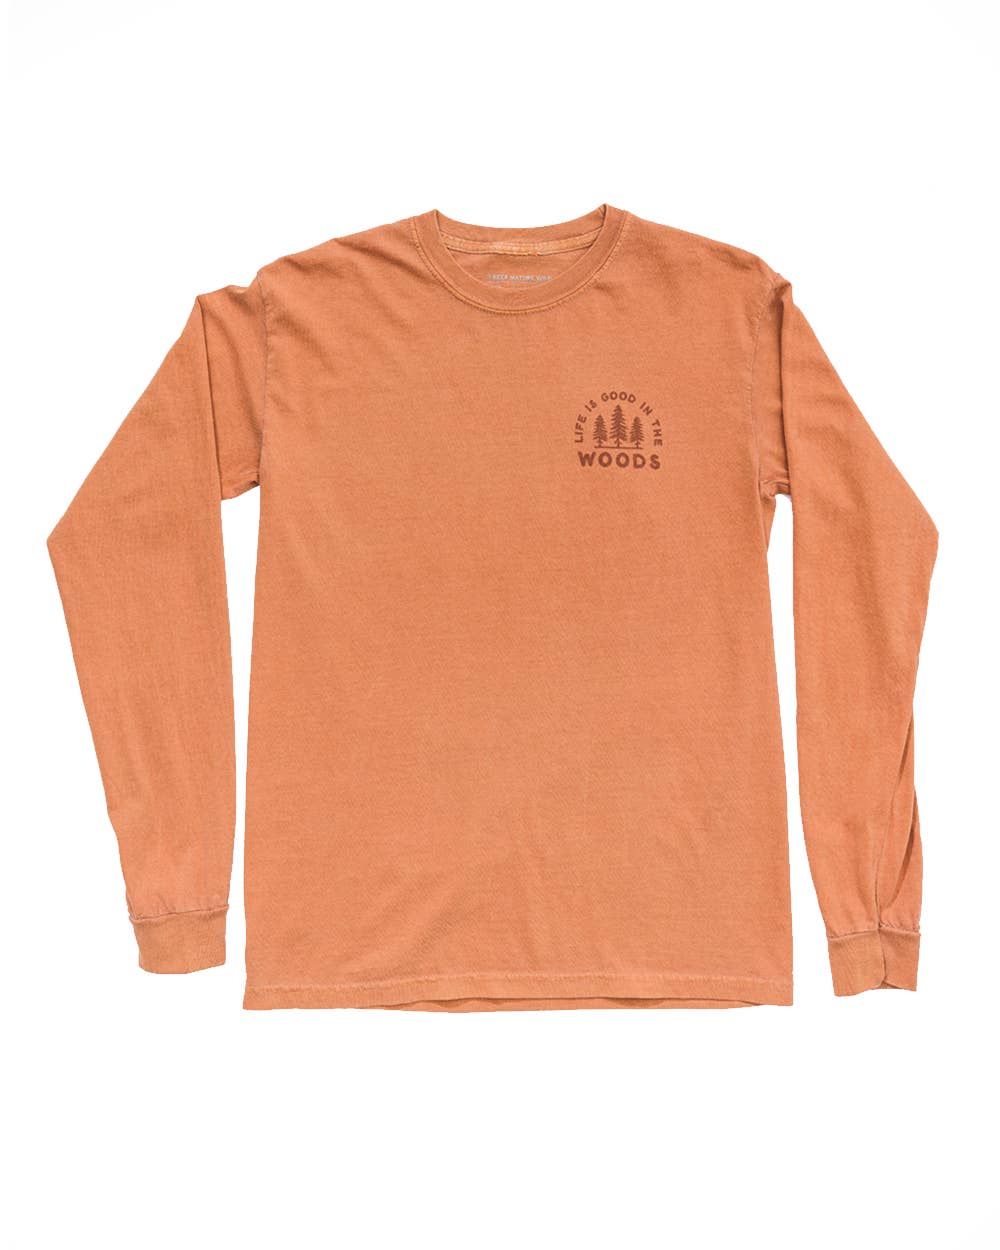 Life is Good in the Woods long sleeve shirt by Keep Nature Wild